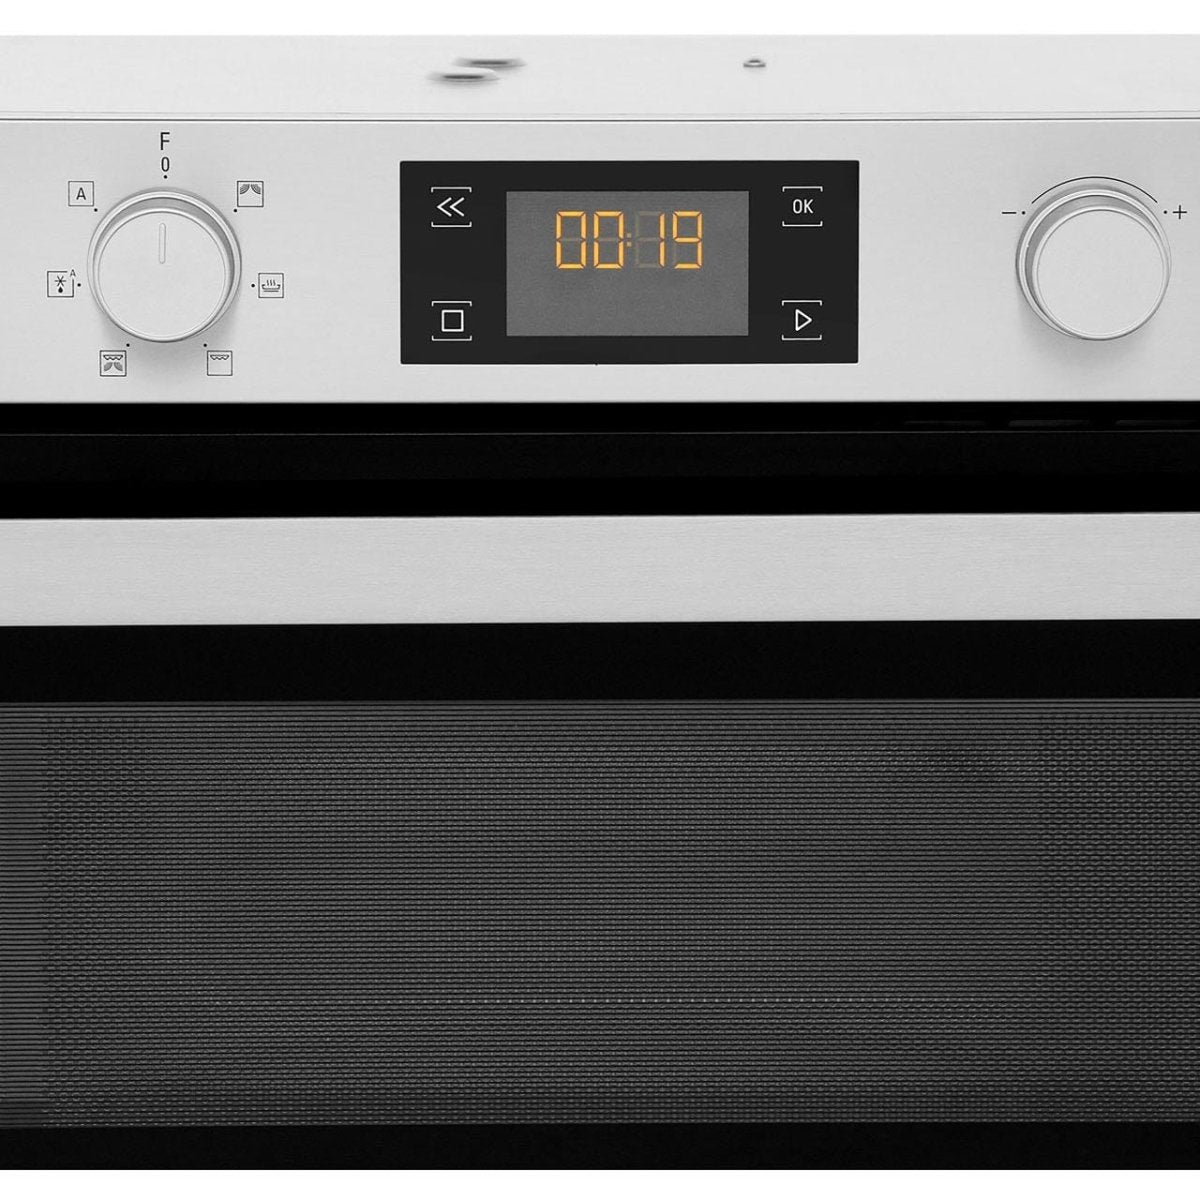 Hotpoint MD344IXH 31L Built-in Microwave Oven And Grill Stainless Steel - Atlantic Electrics